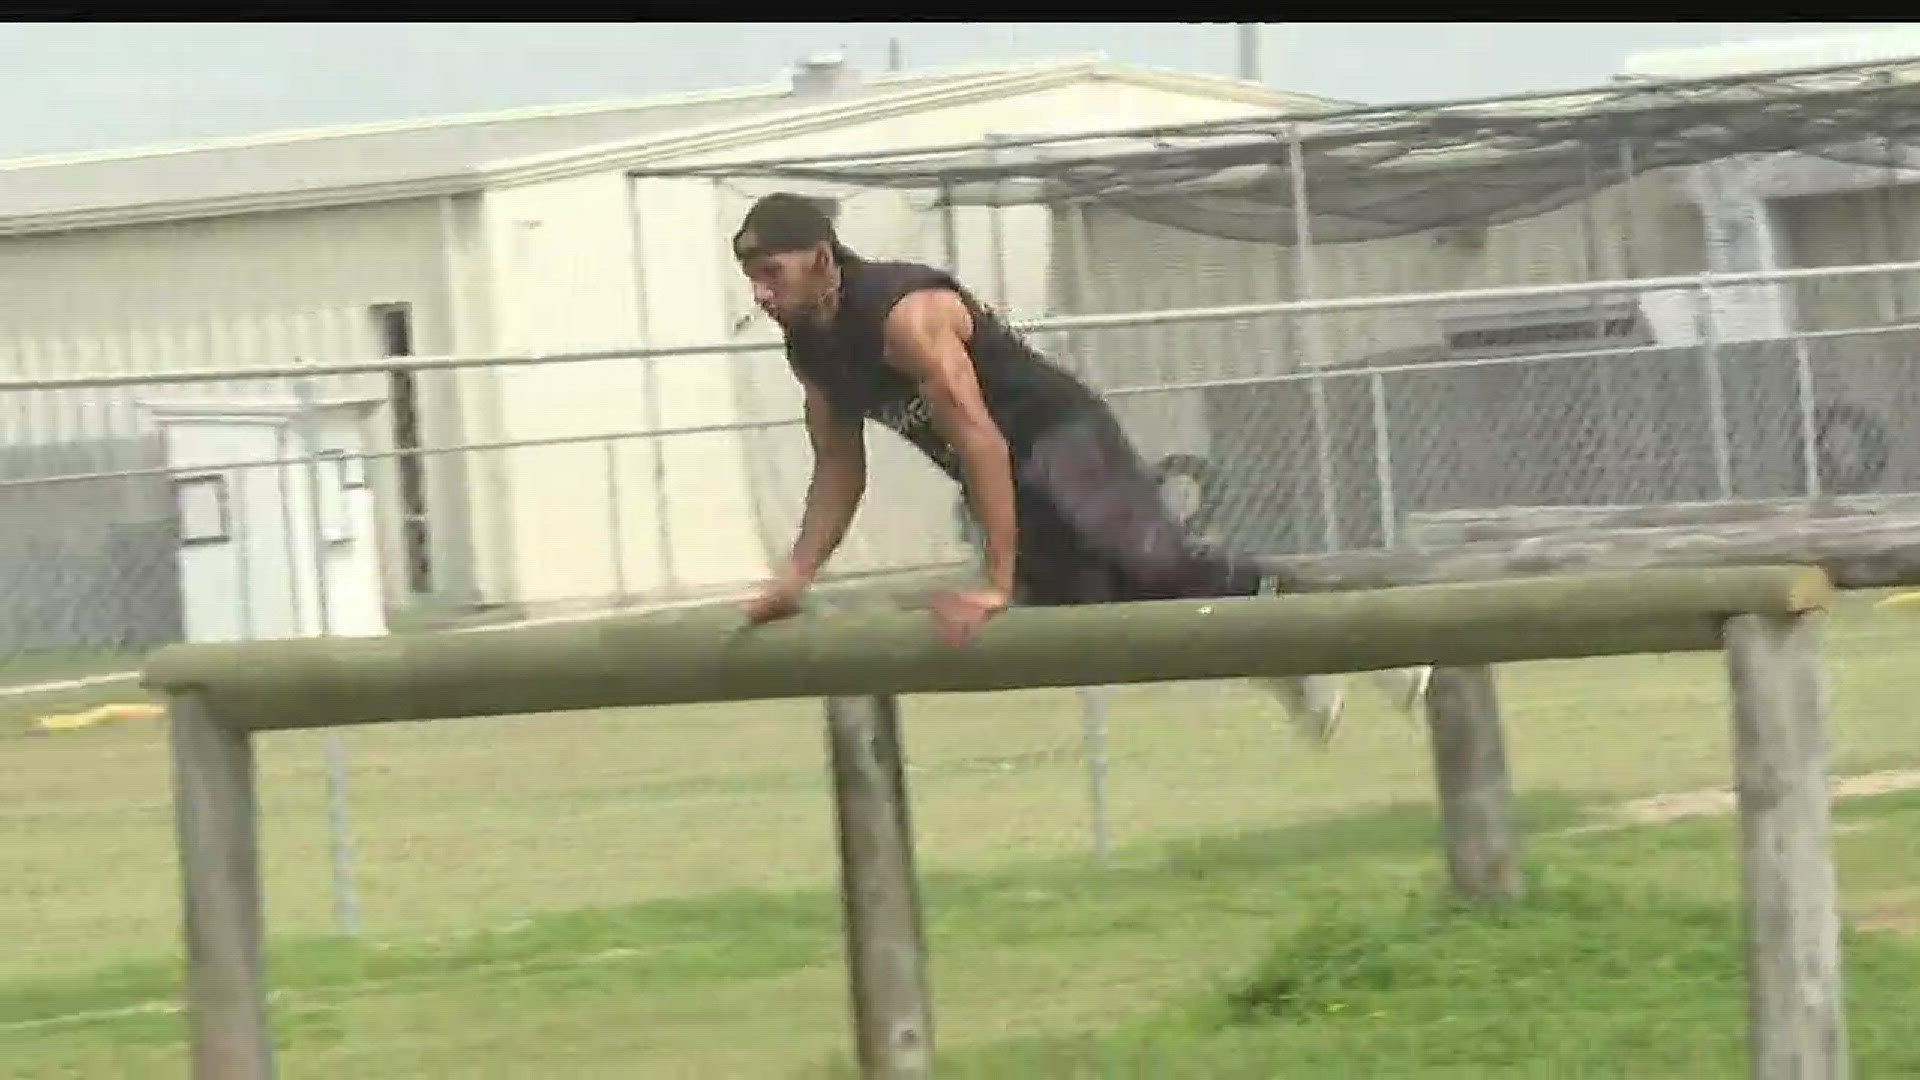 One man from Aransas Pass completes rigorous obstacle courses and competitions worldwide.